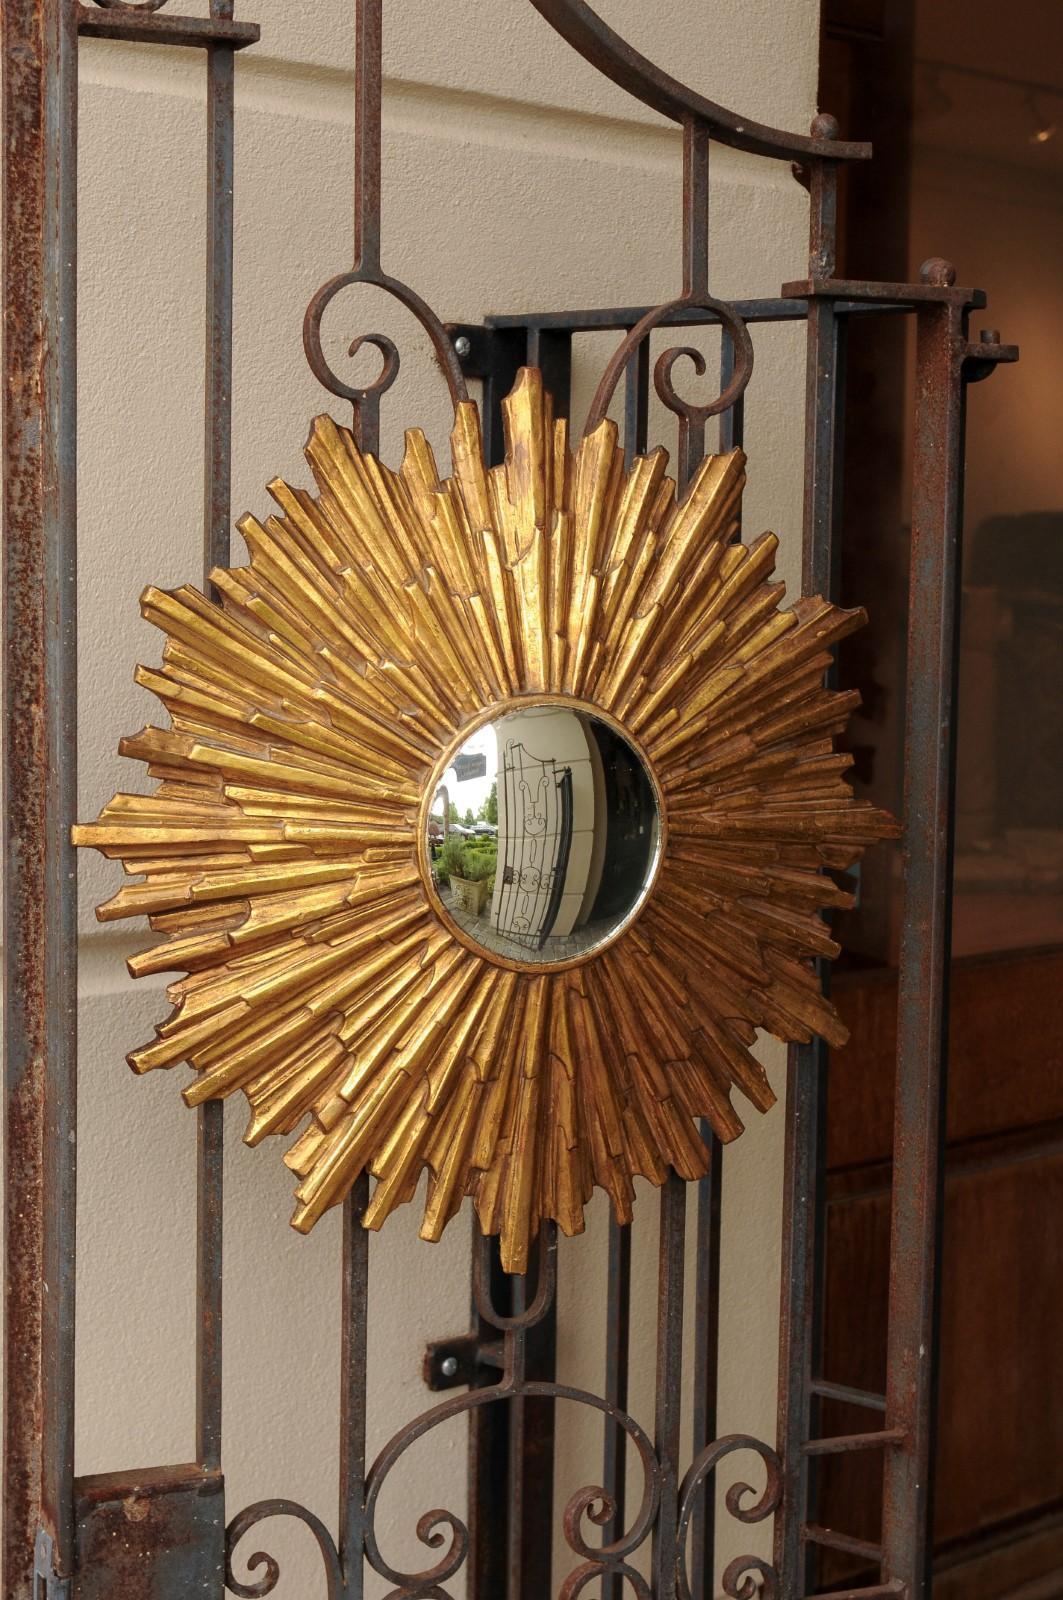 A vintage Italian gilt composition sunburst mirror from the mid-20th century with rays of varying sizes and convex mirror. Born in the third quarter of the 20th century, this Italian sunburst mirror features a central convex mirror that distorts